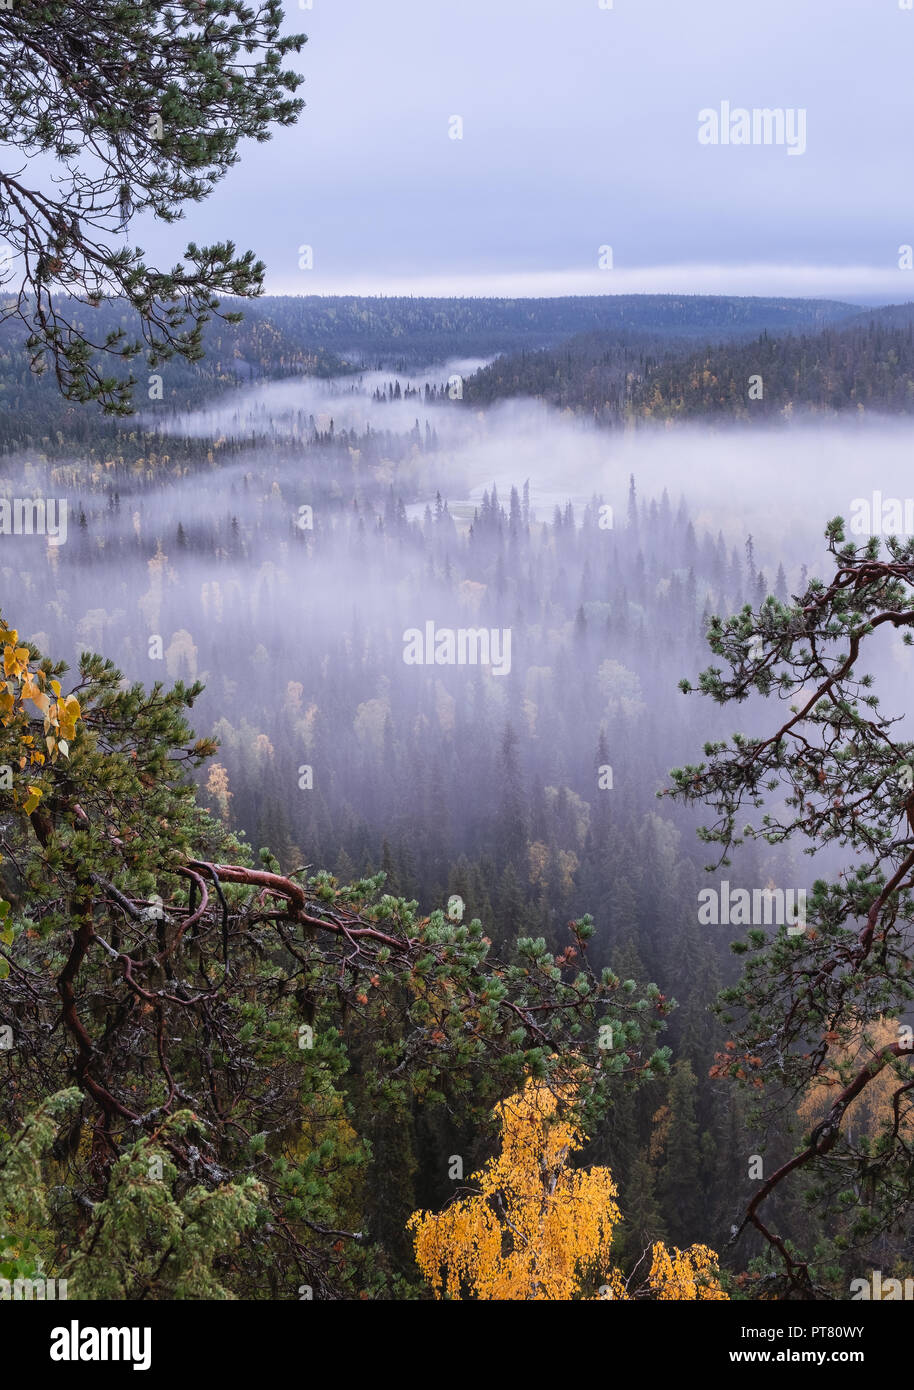 Scenic landscape view with morning fog and fall colors at moody day in Kuusamo, Finland Stock Photo